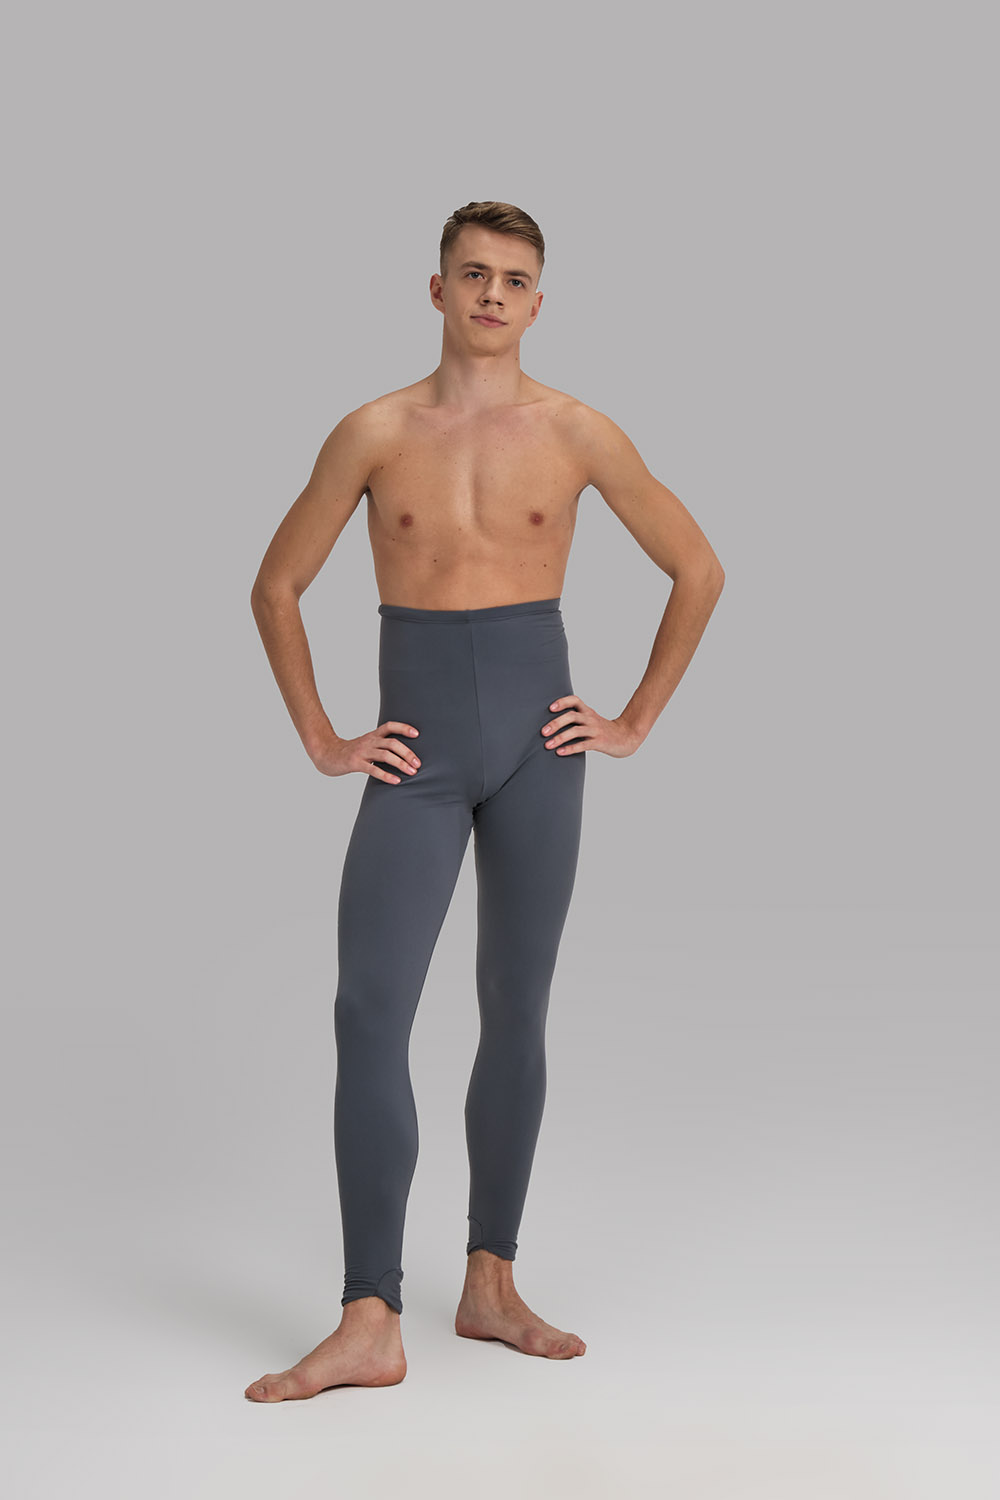 ERIC, Men's leggings (DA2008MN)  Nikolay® - official online shop of pointe  shoes and dance apparel in the USA